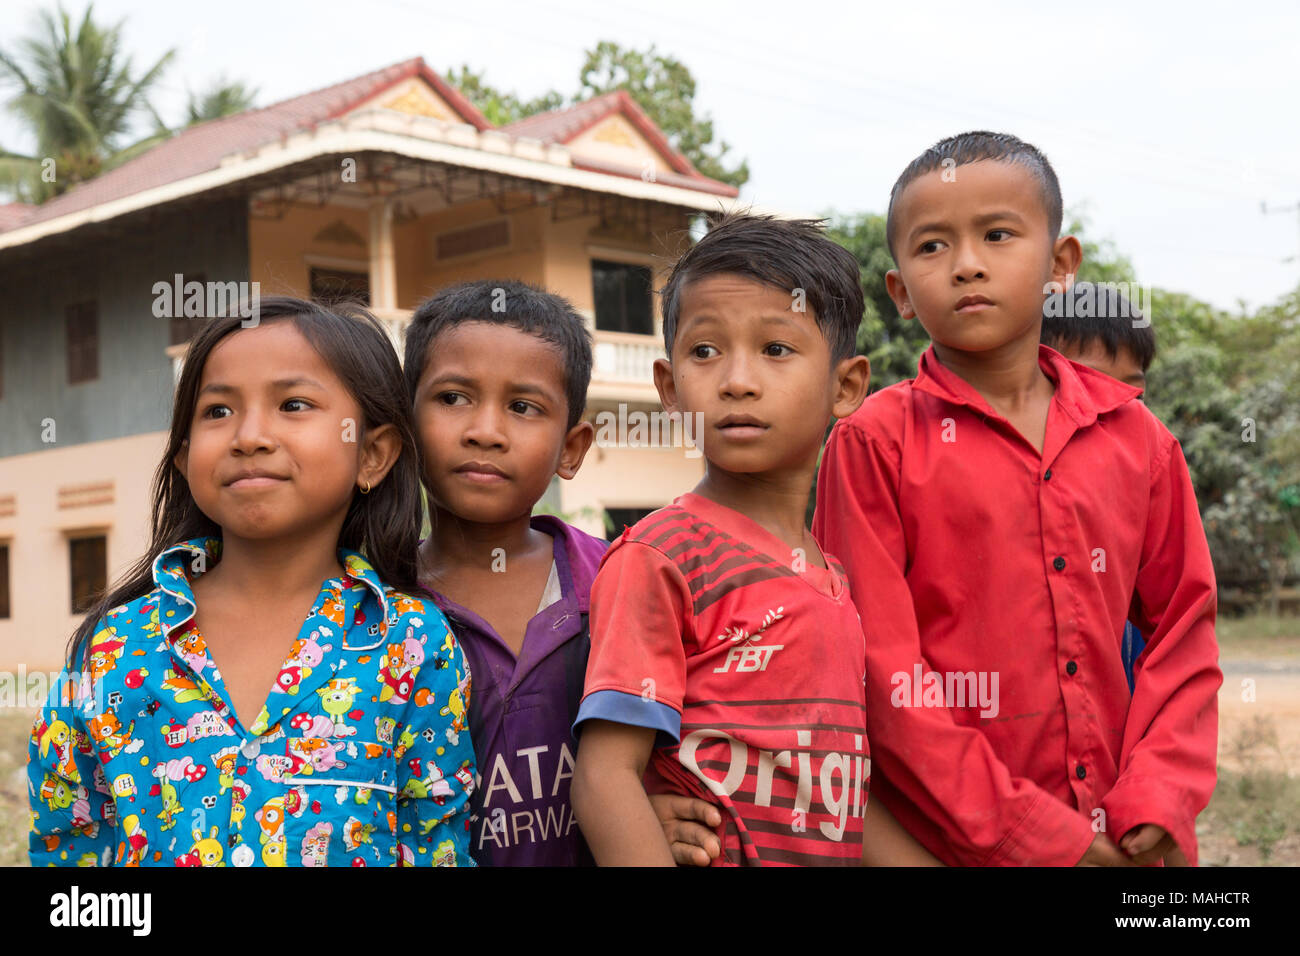 A group of Cambodian children aged 8-10 years, Kampong Thom, Cambodia, Asia Stock Photo